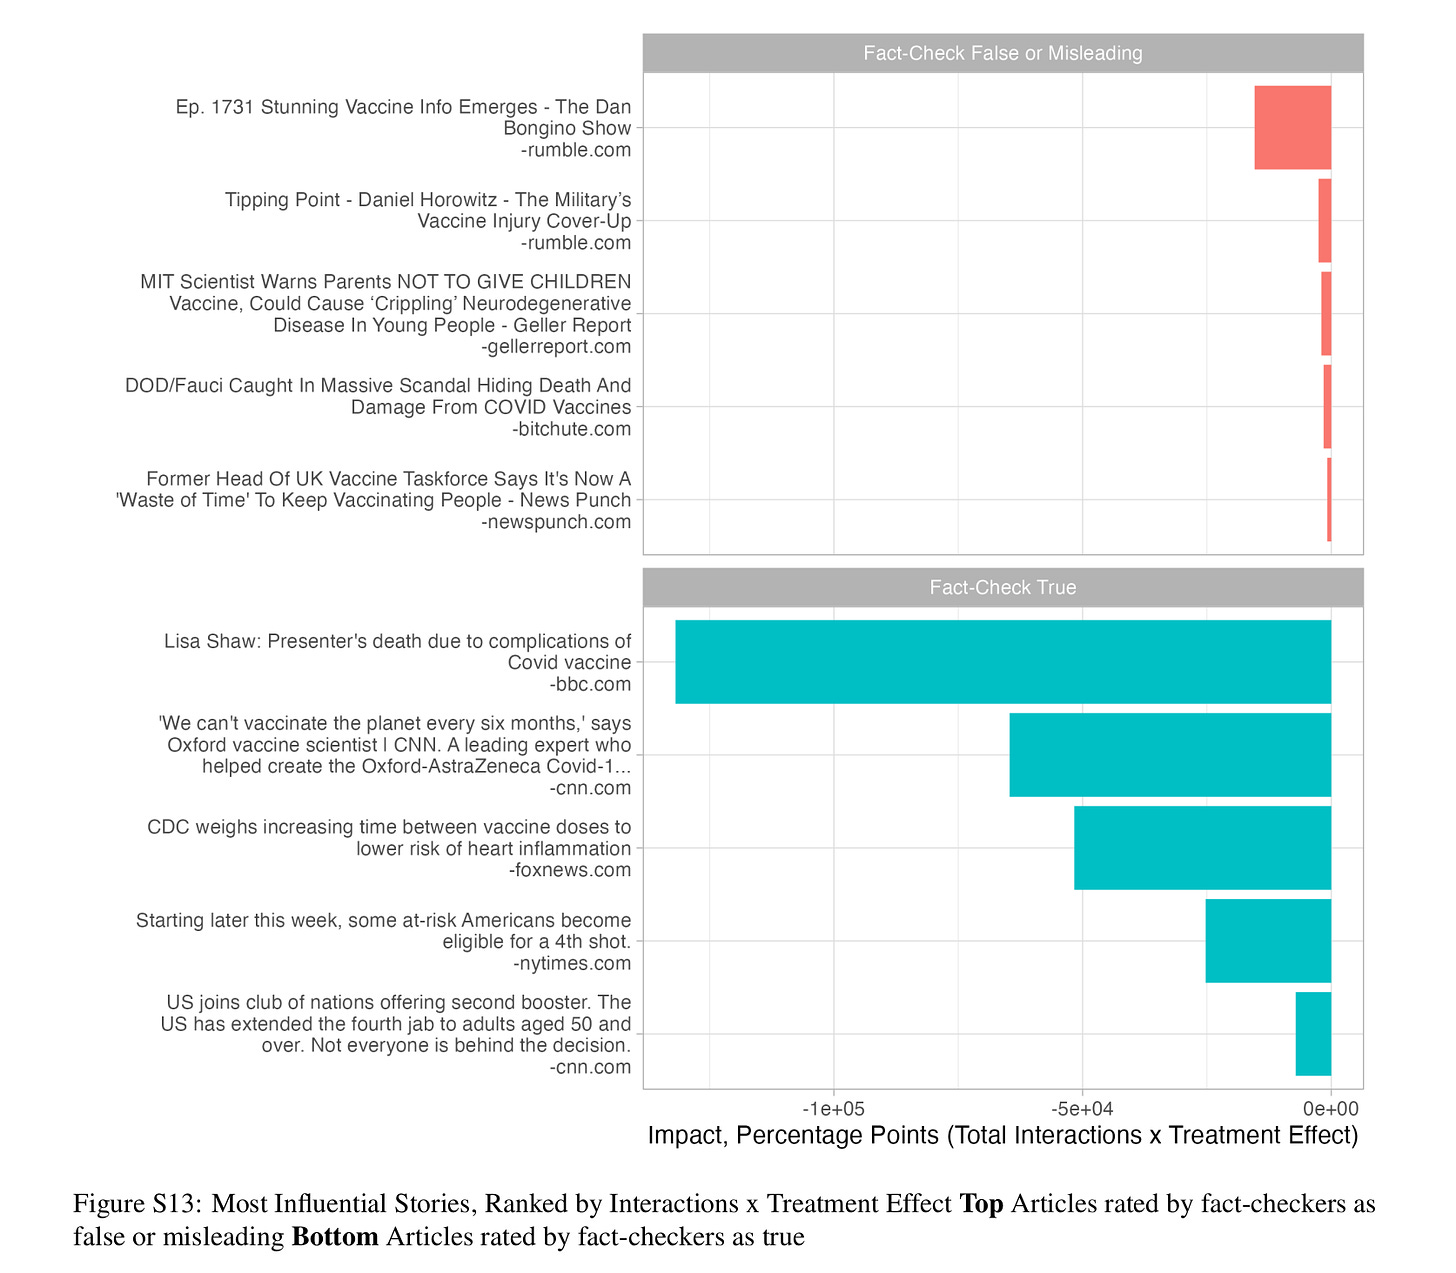 Figure S13: Most Influential Stories, Ranked by Interactions x Treatment Effect Top Articles rated by fact-checkers as
false or misleading Bottom Articles rated by fact-checkers as true

bars at the bottom are much much larger